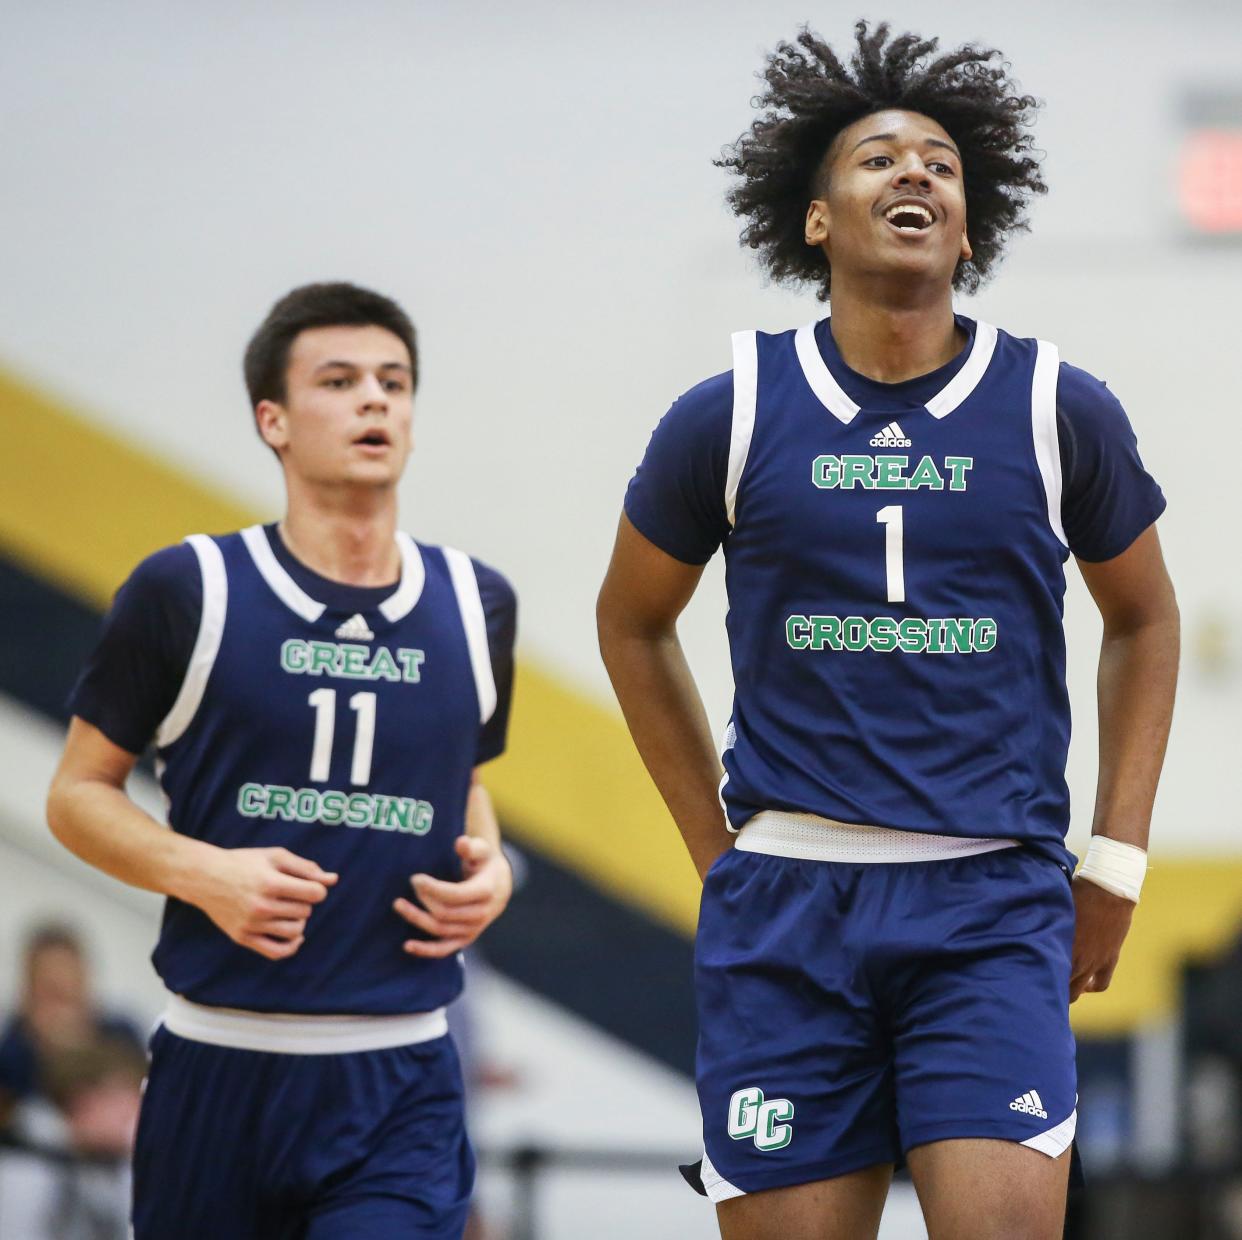 Great Crossing's Vince Dawson, right, and his teammates remained the No. 1 team in the latest Kentucky High School Boys Basketball Media Poll.